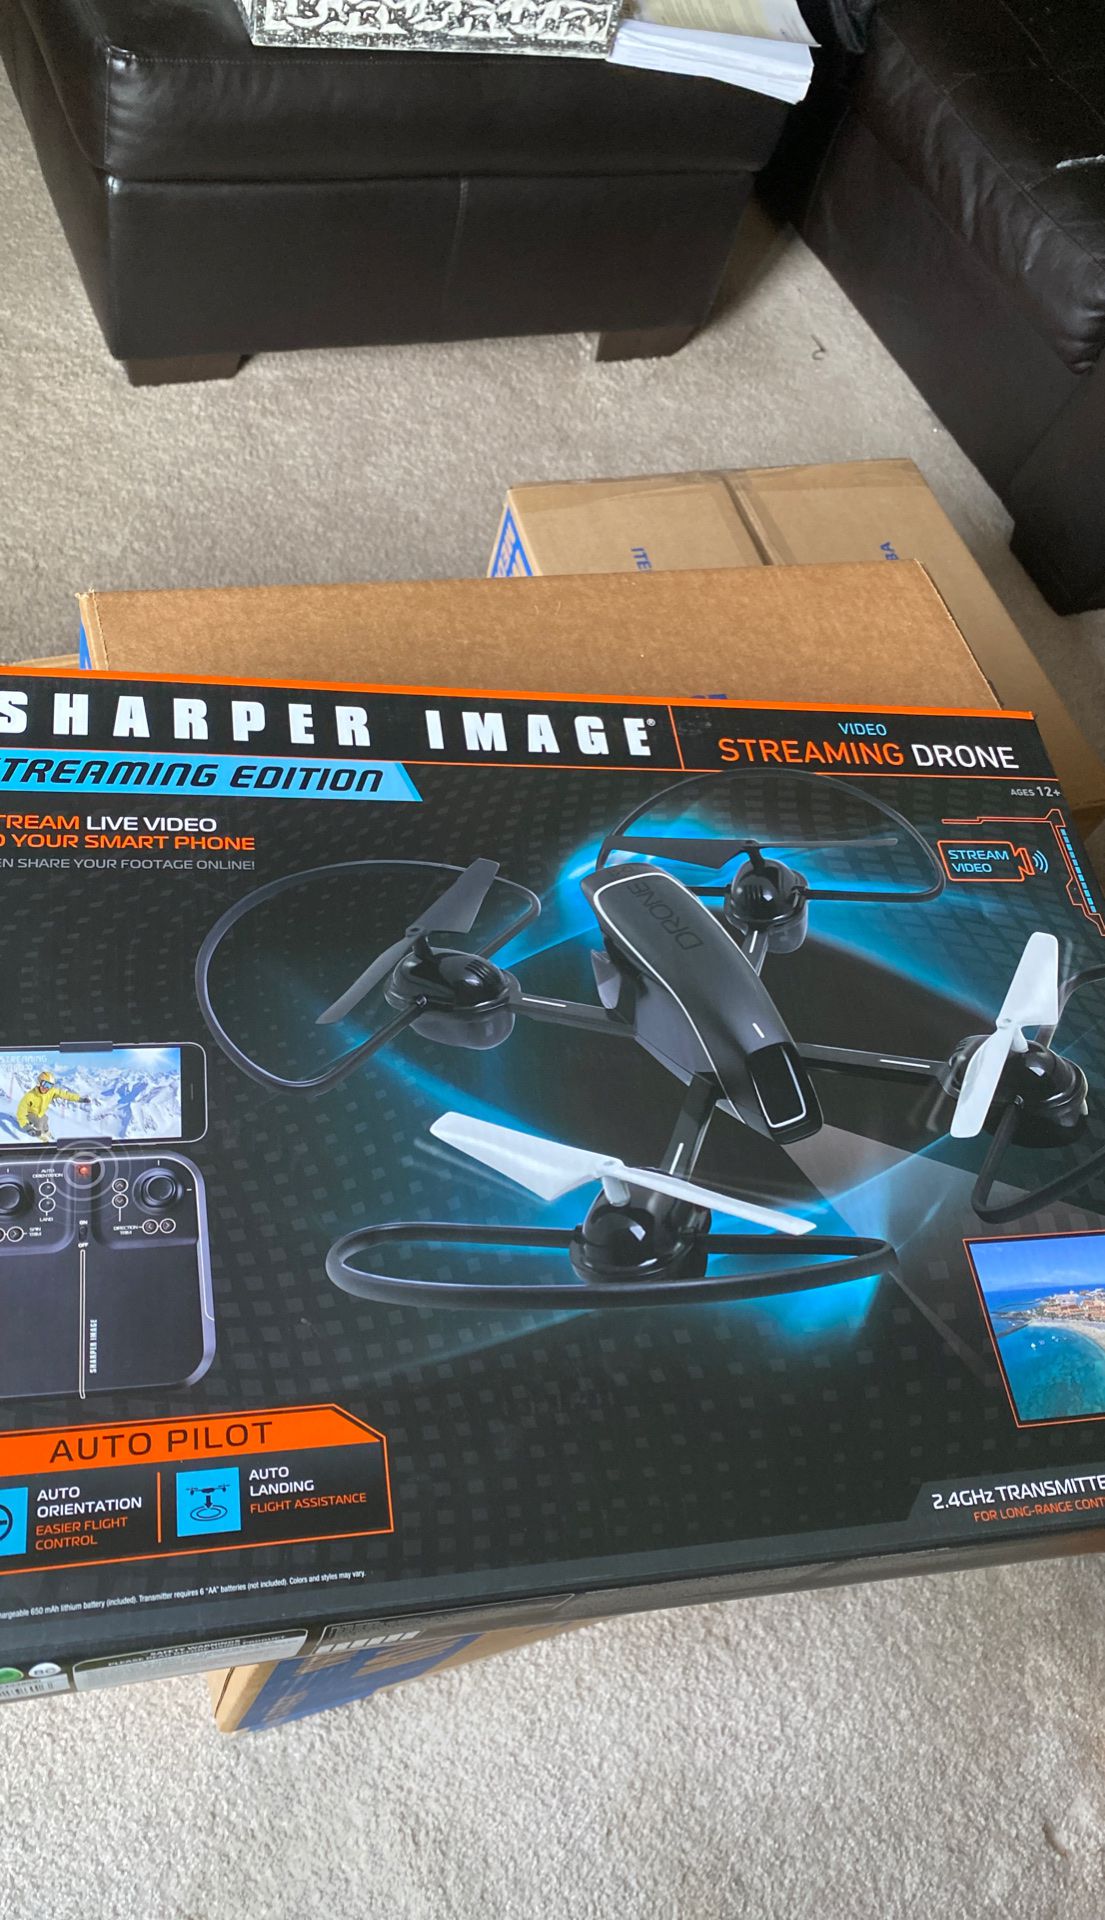 Sharper Image Video Streaming Drone